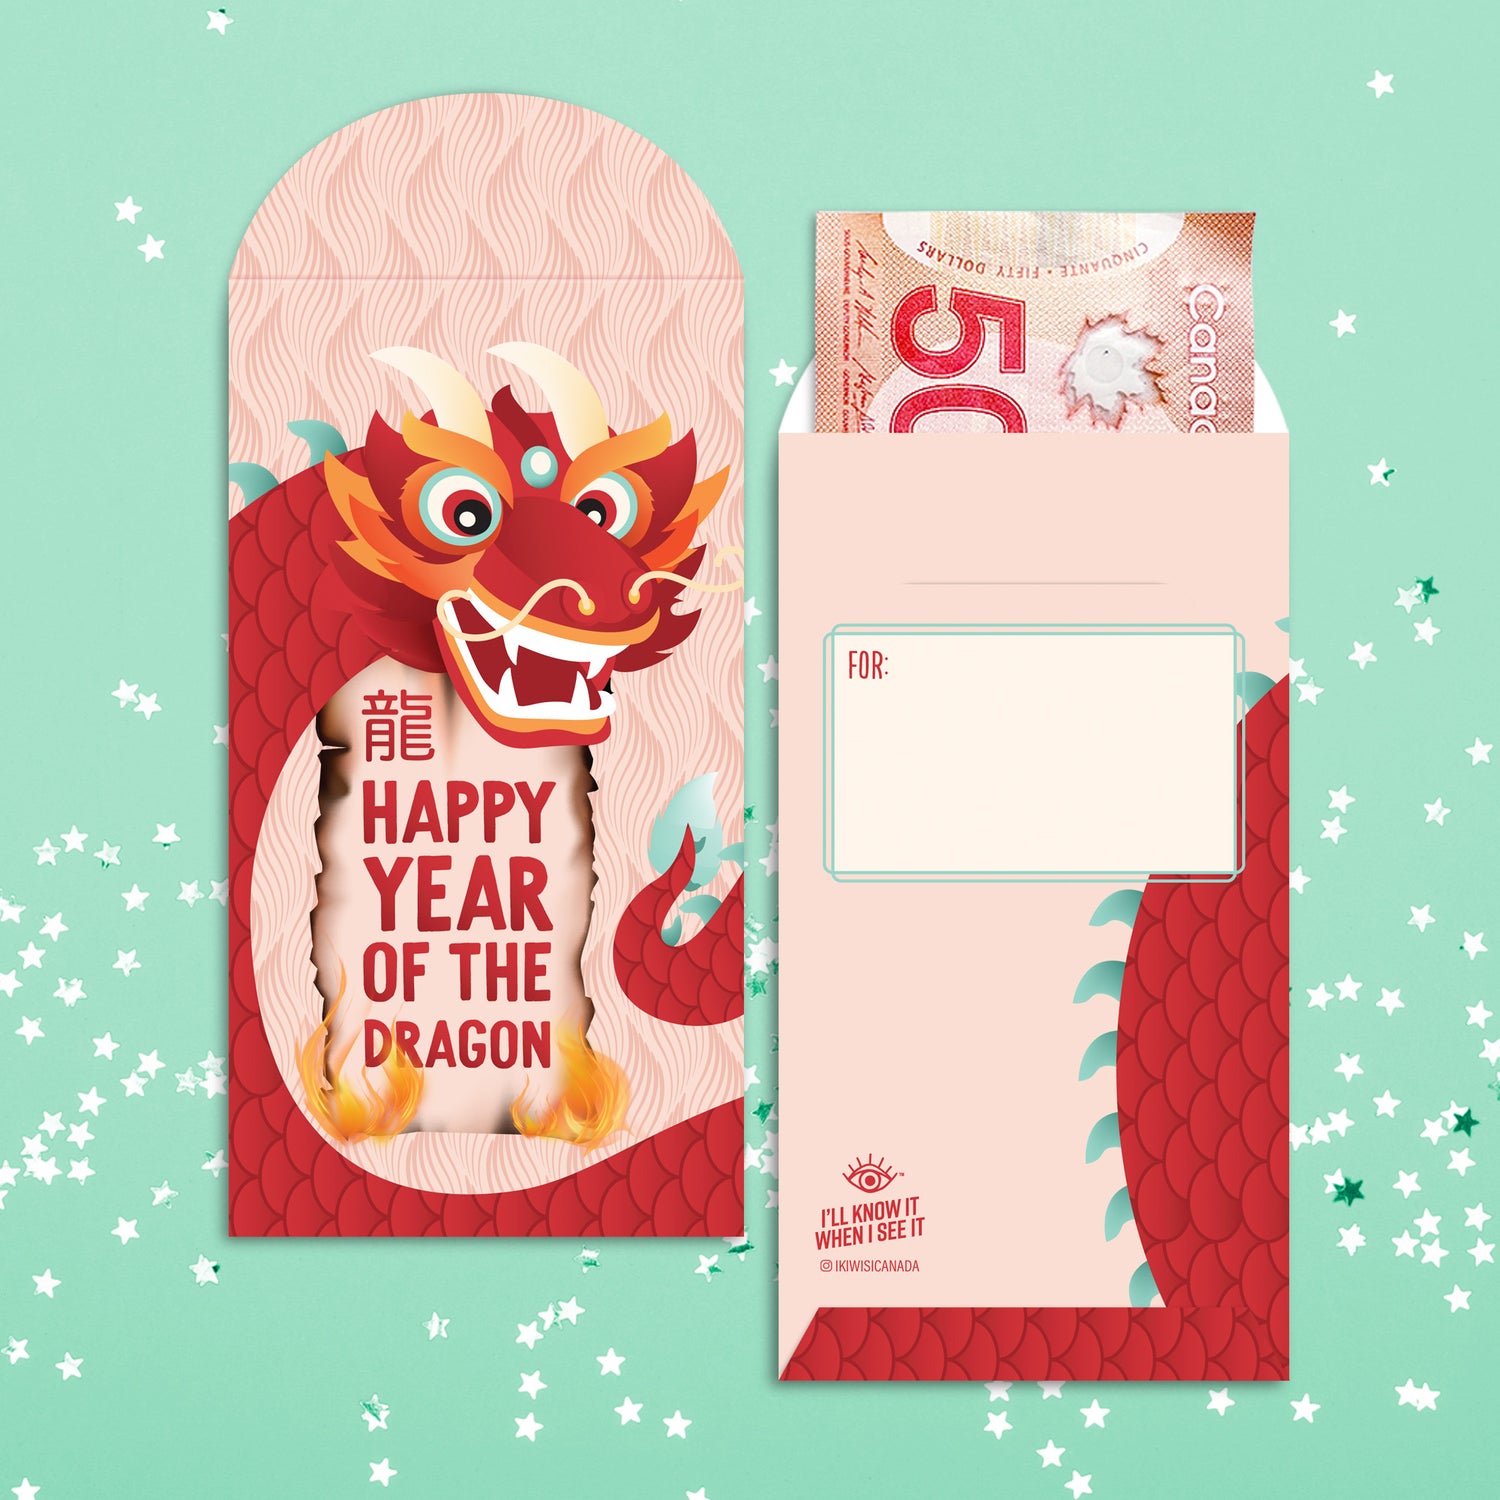 Happy year of the dragon